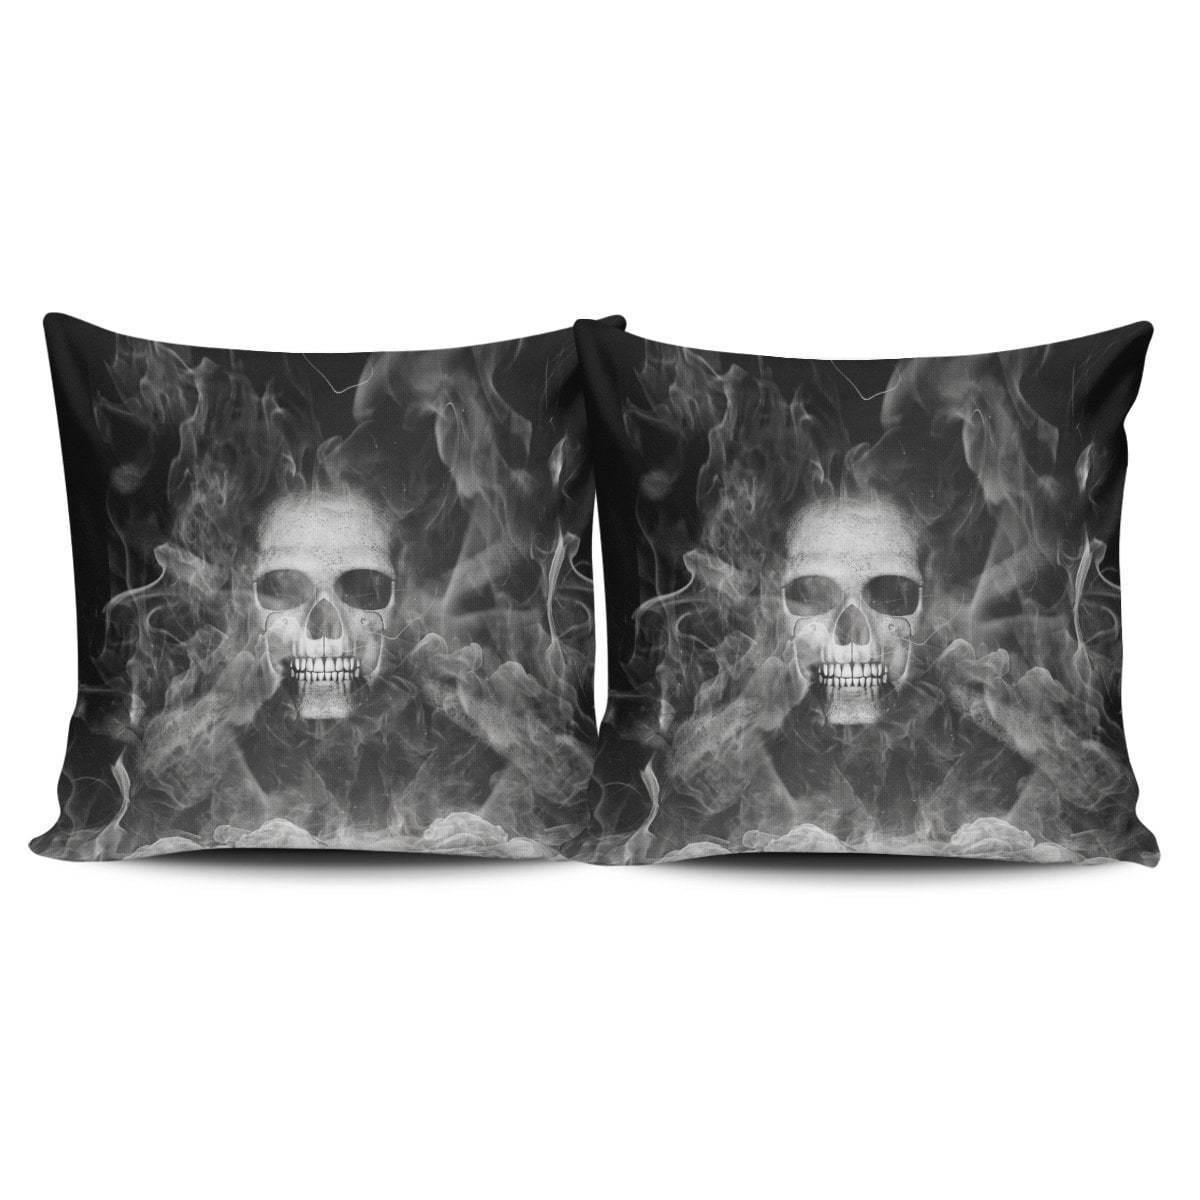 Smoked Skulls Pillow Cover - American Legend Rider